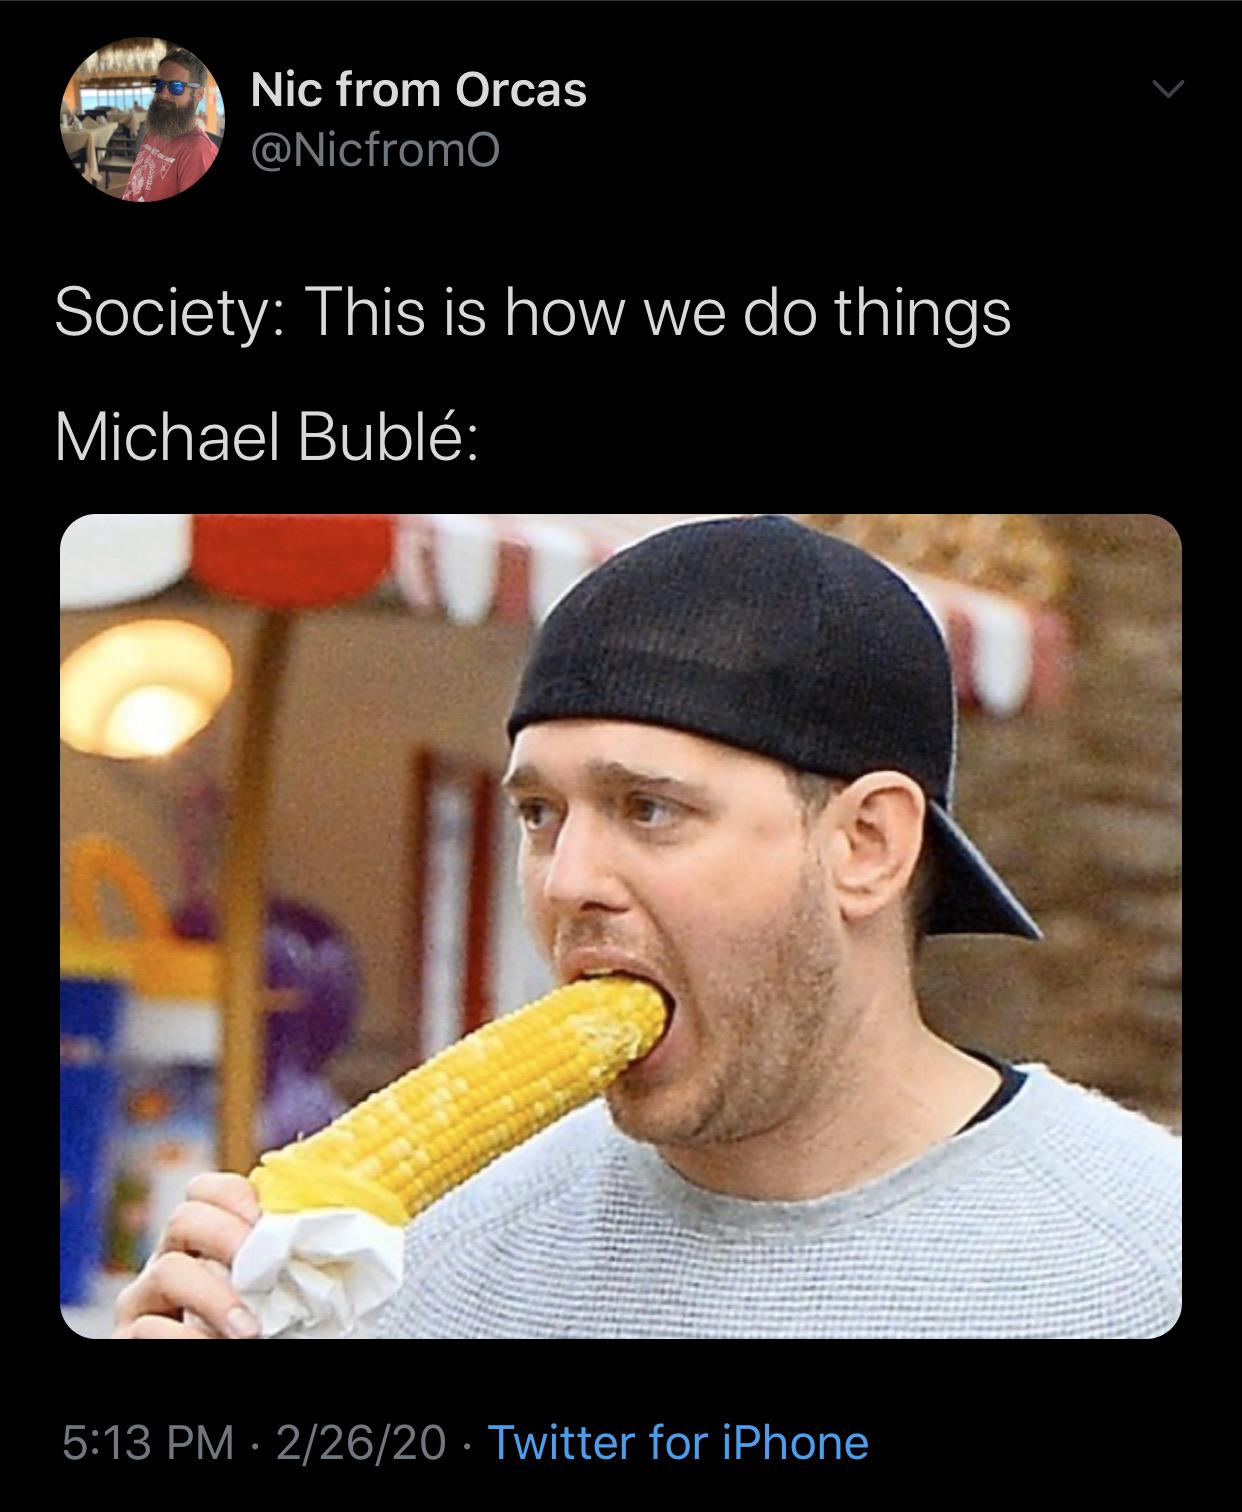 michael buble can t eat corn - Nic from Orcas Society This is how we do things Michael Bubl 22620 Twitter for iPhone